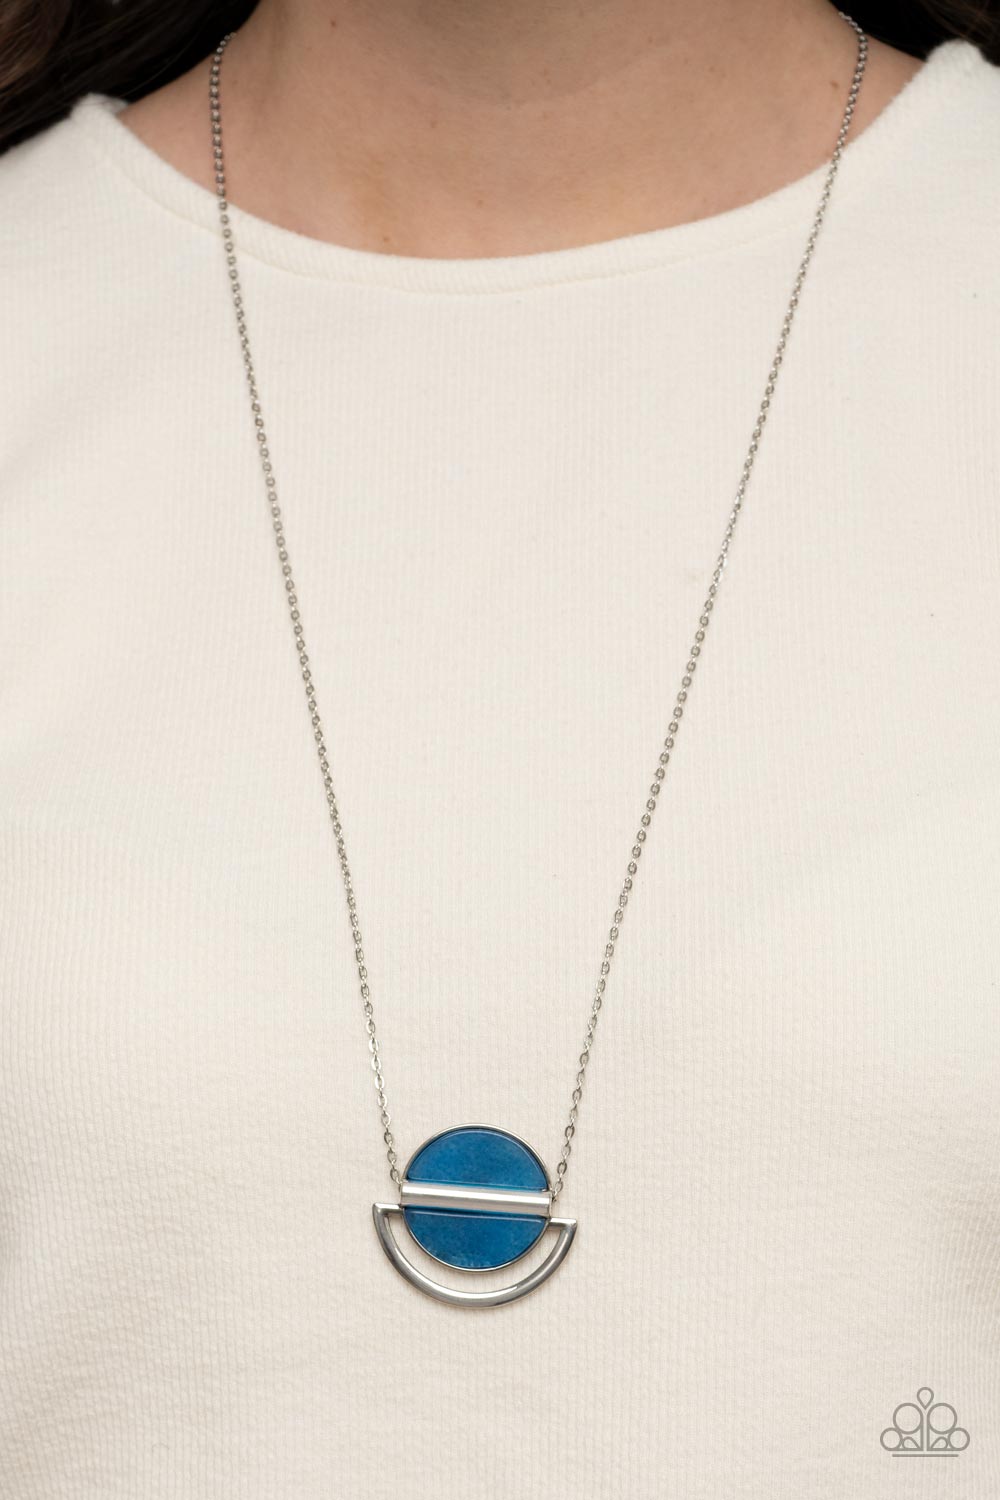 Paparazzi Necklaces - Ethereal Eclipse - Blue